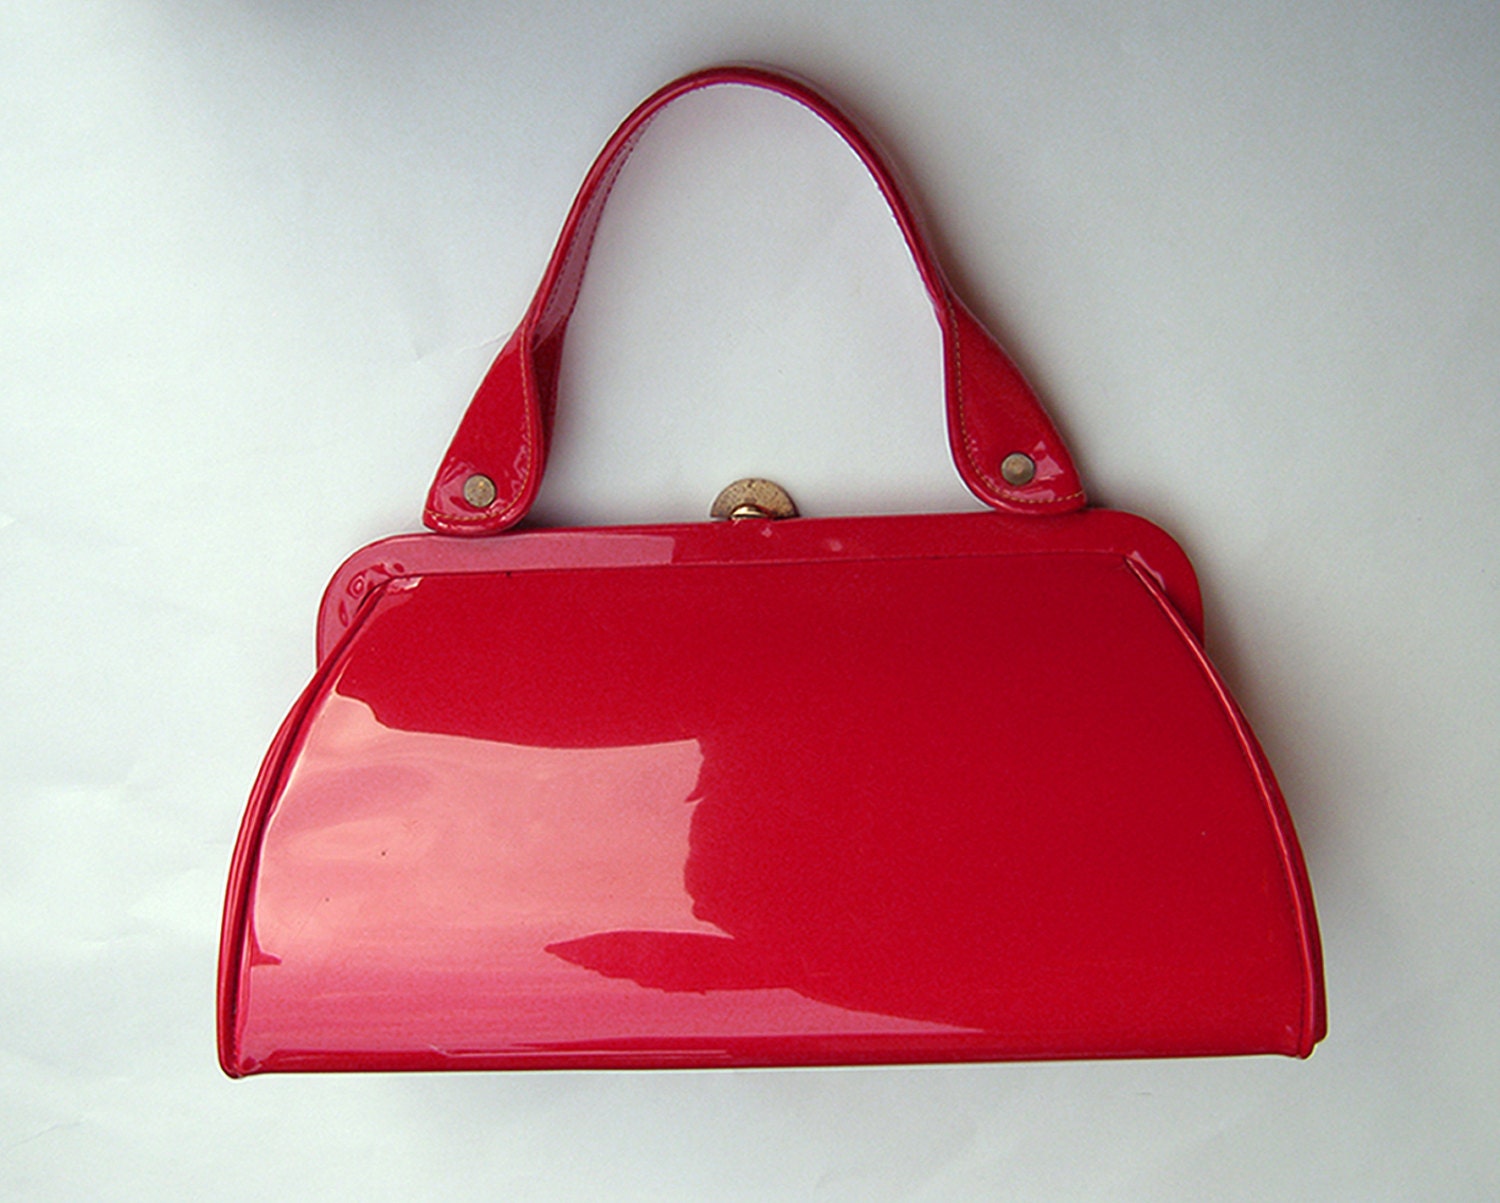 Red Patent Leather Vintage Handbag. by EndymionLane on Etsy